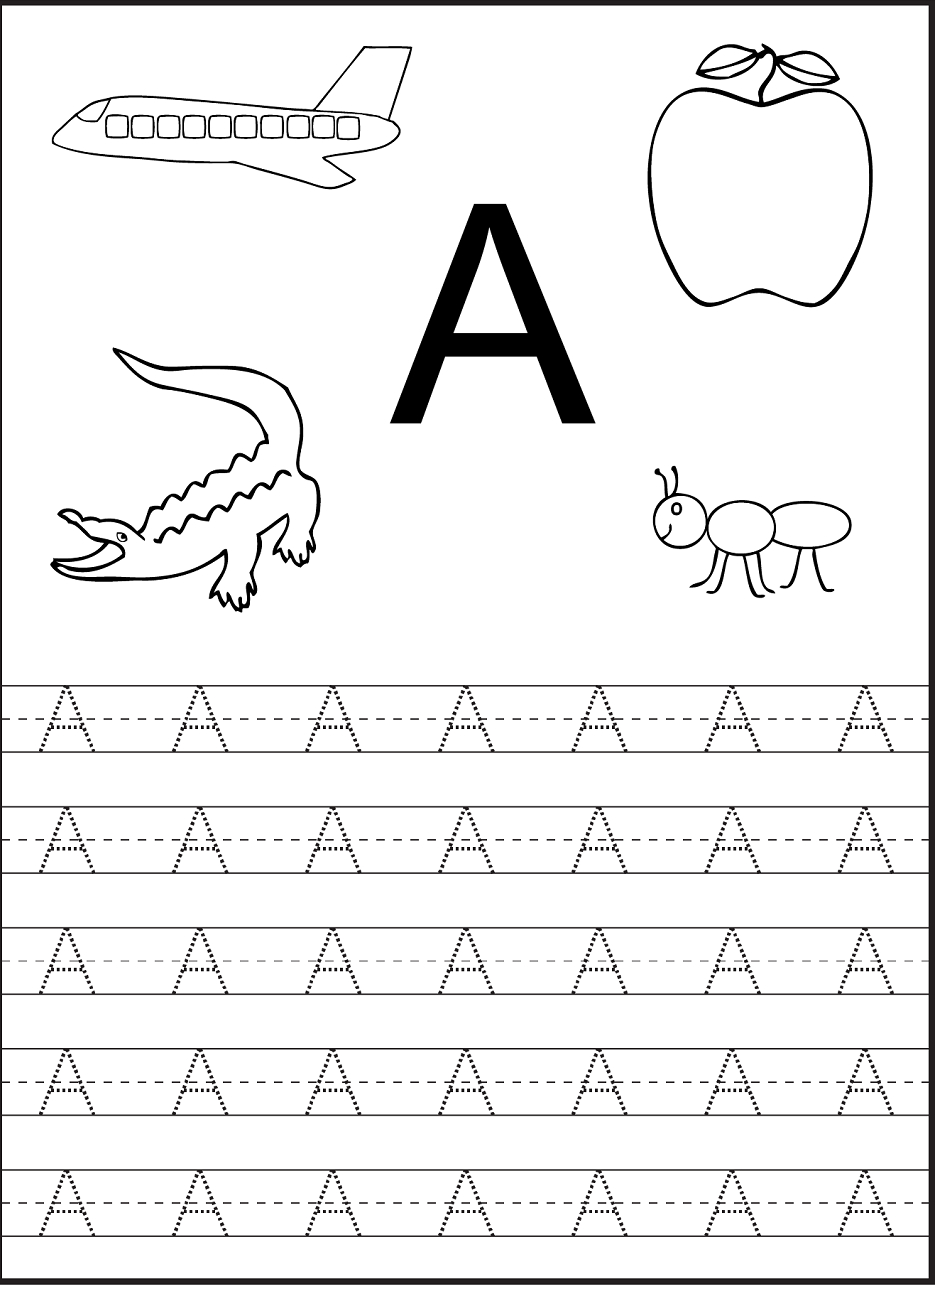 Tracing The Letter A Free Printable | Preschool Worksheets within Tracing Letters Printable Free